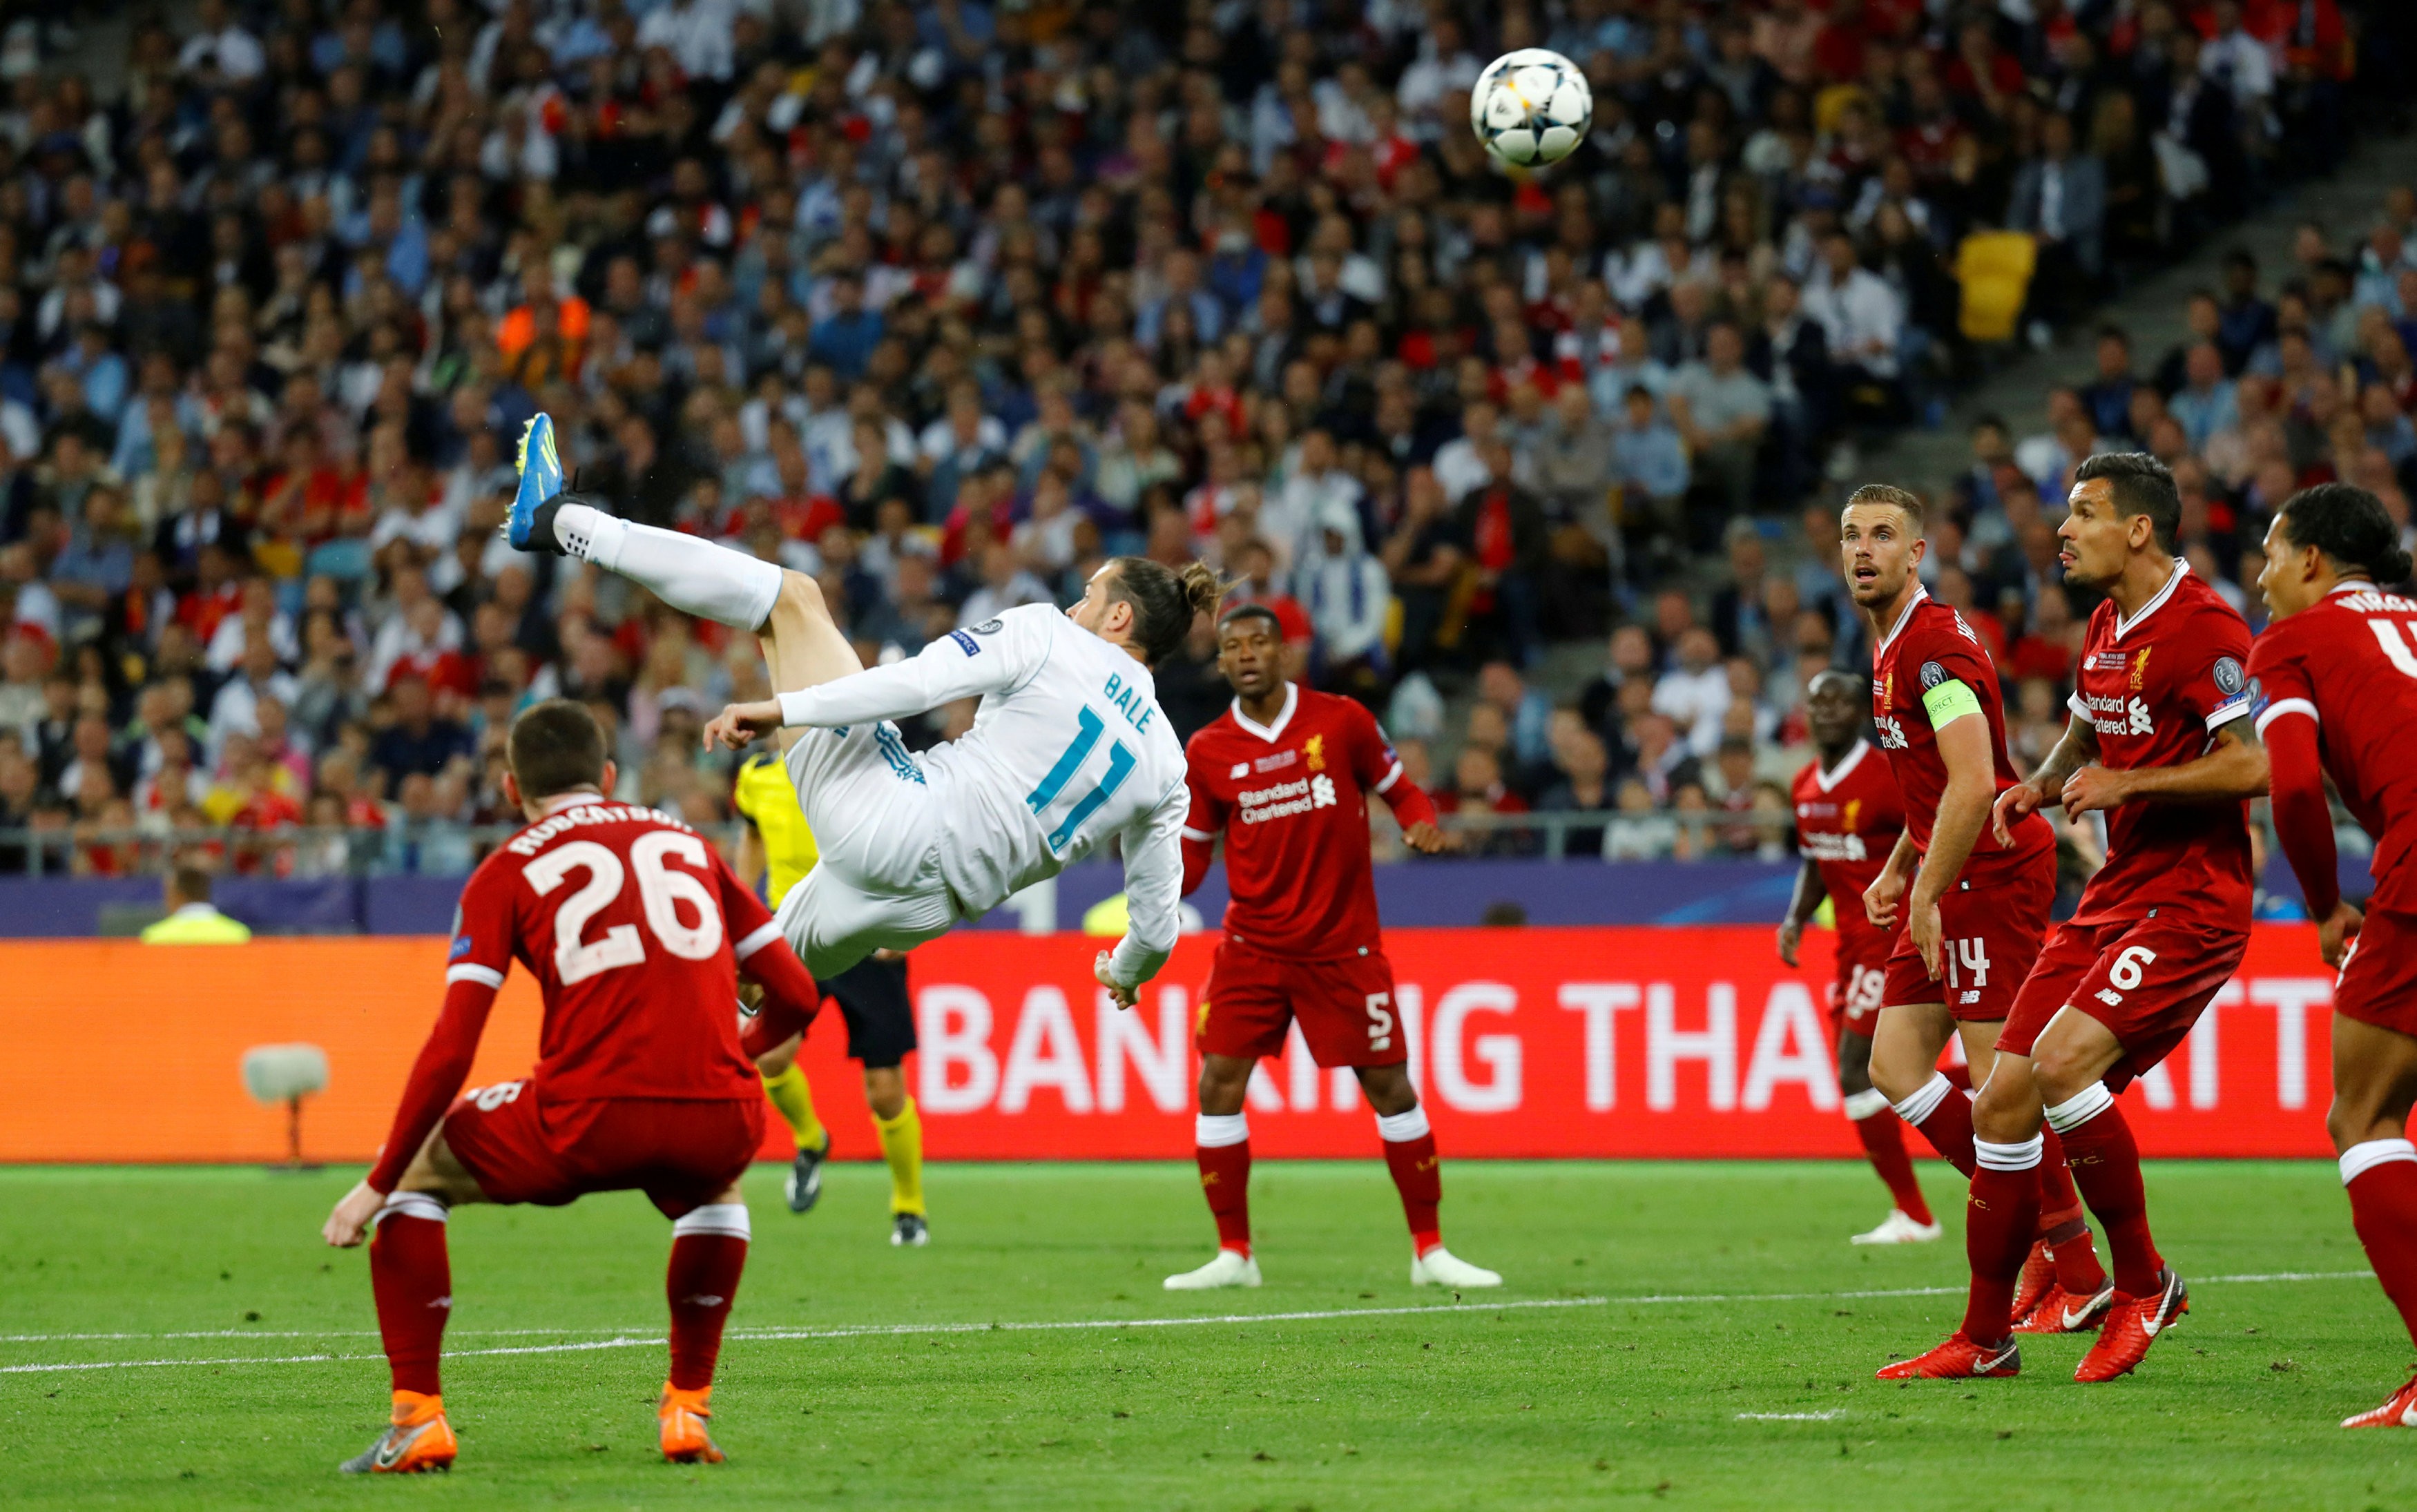 Real Madrid substitute Gareth Bale scores one of his two goals in Madrid’s 3-1 triumph over Liverpool in the 2018 Uefa Champions League final in Kiev. Photo: Reuters